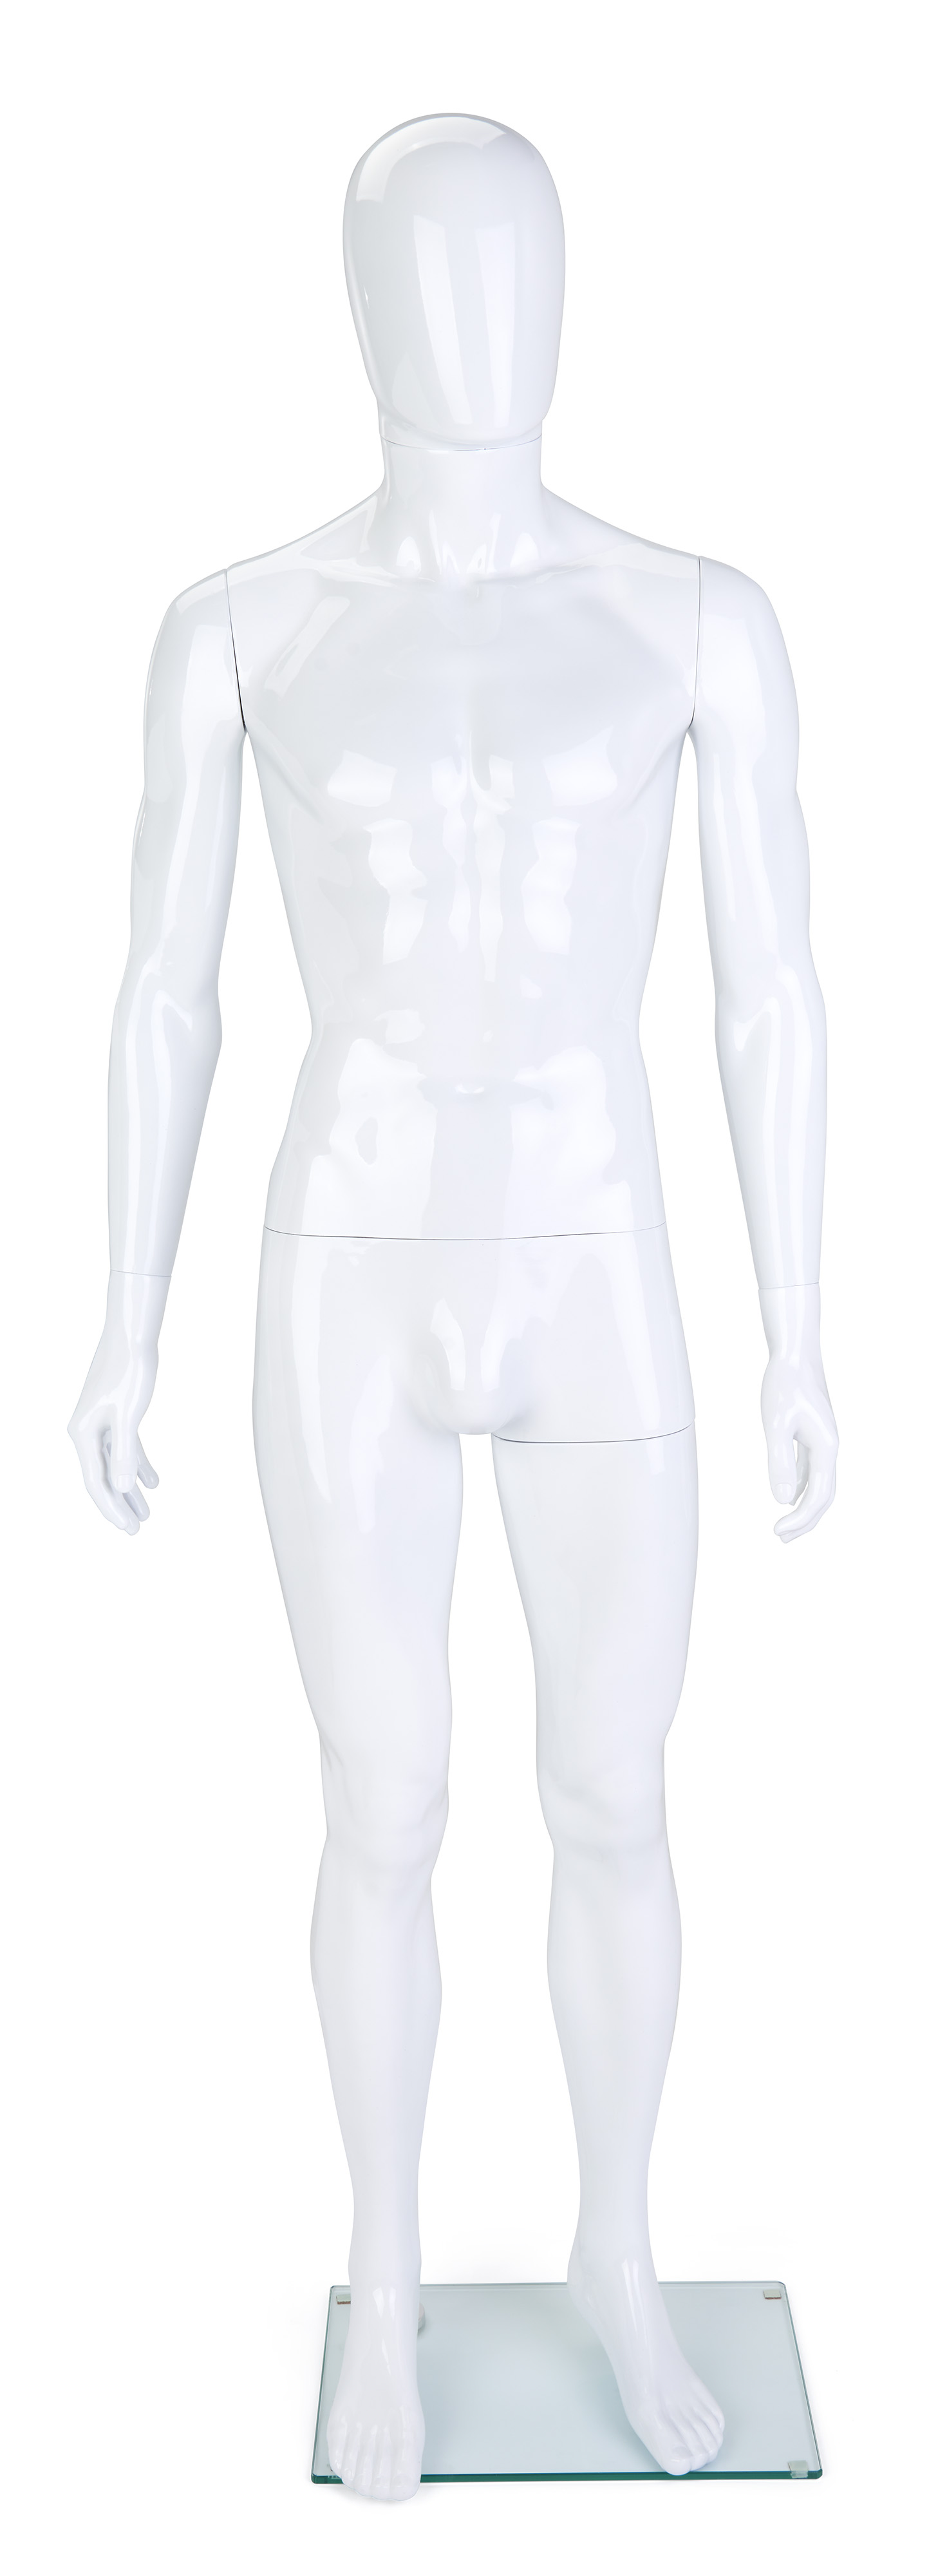 Male Full Body Mannequin in Standing Pose, White Color